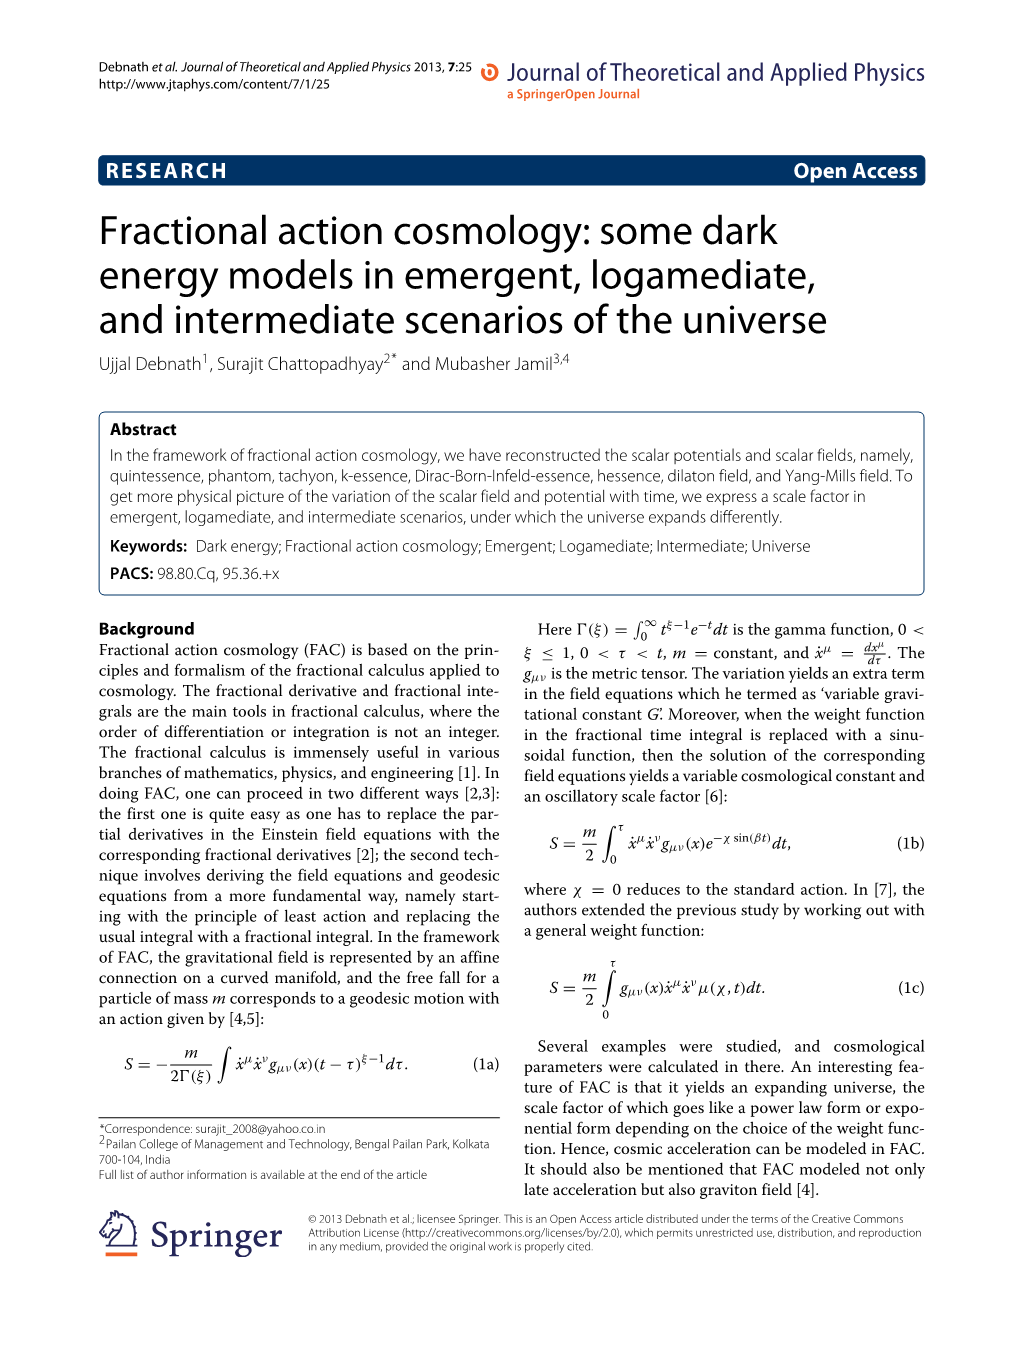 Fractional Action Cosmology